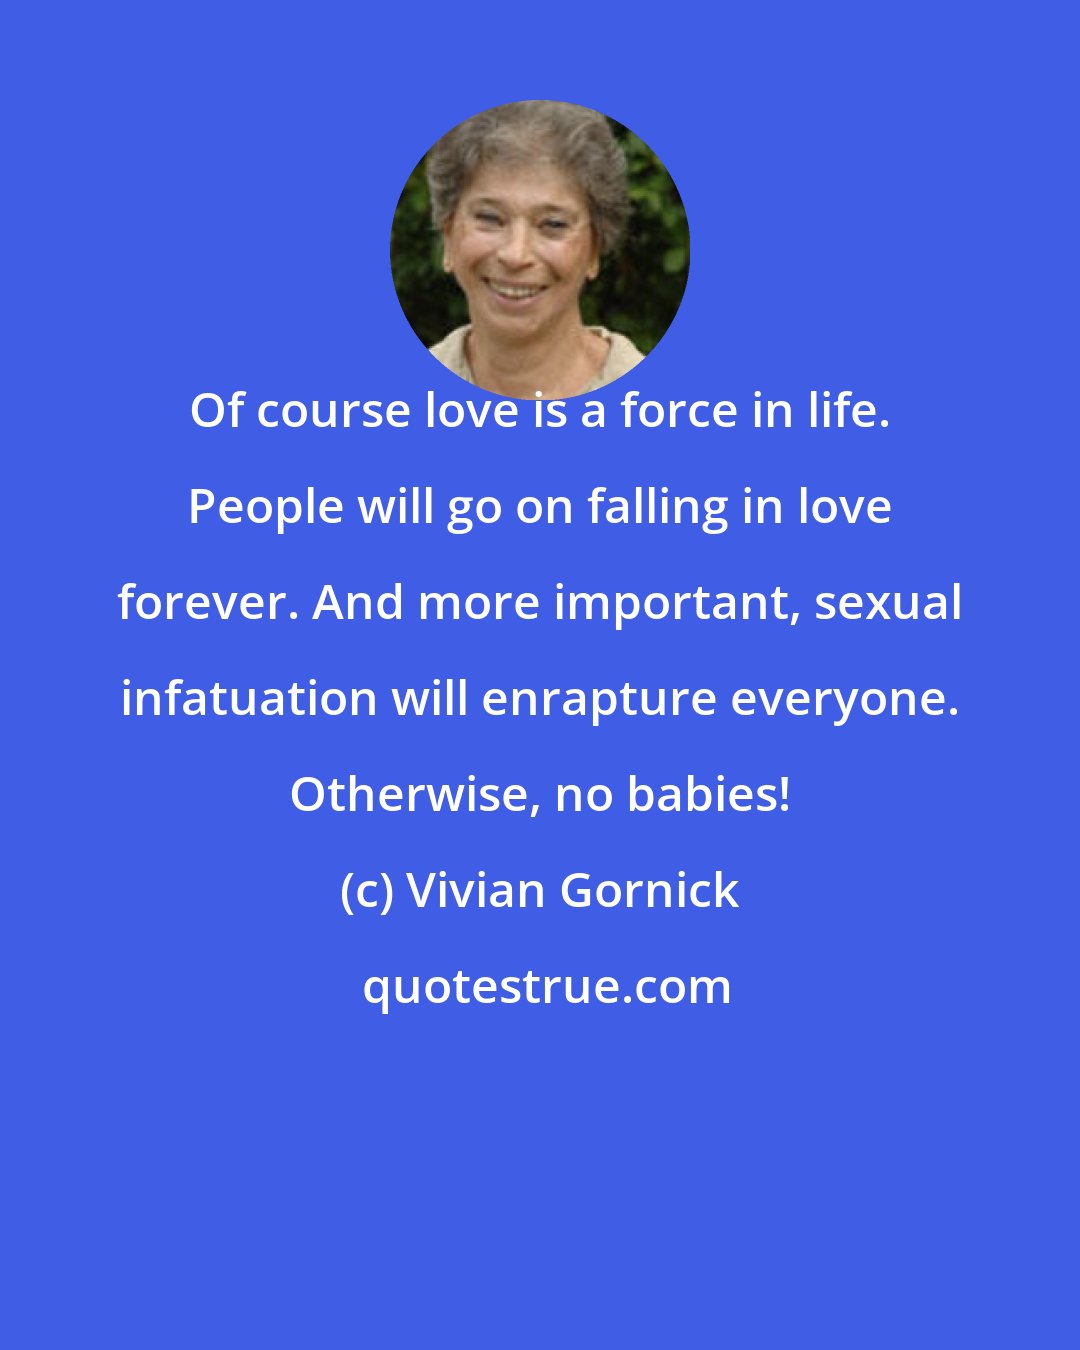 Vivian Gornick: Of course love is a force in life. People will go on falling in love forever. And more important, sexual infatuation will enrapture everyone. Otherwise, no babies!